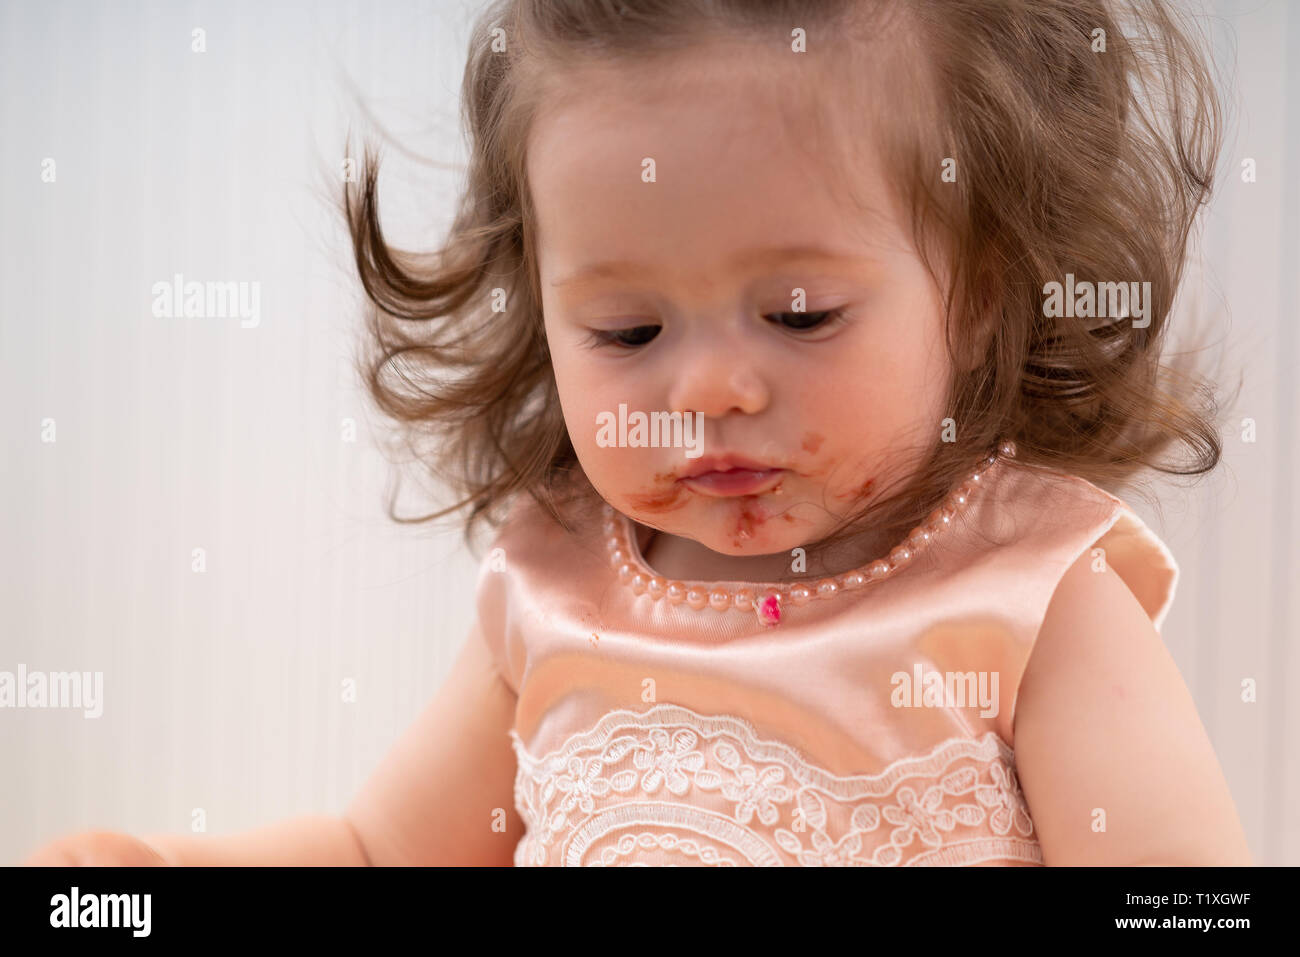 Cute little girl with a dirty sticky face full of red jelly from eating her birthday cake in a close up cropped portrait Stock Photo